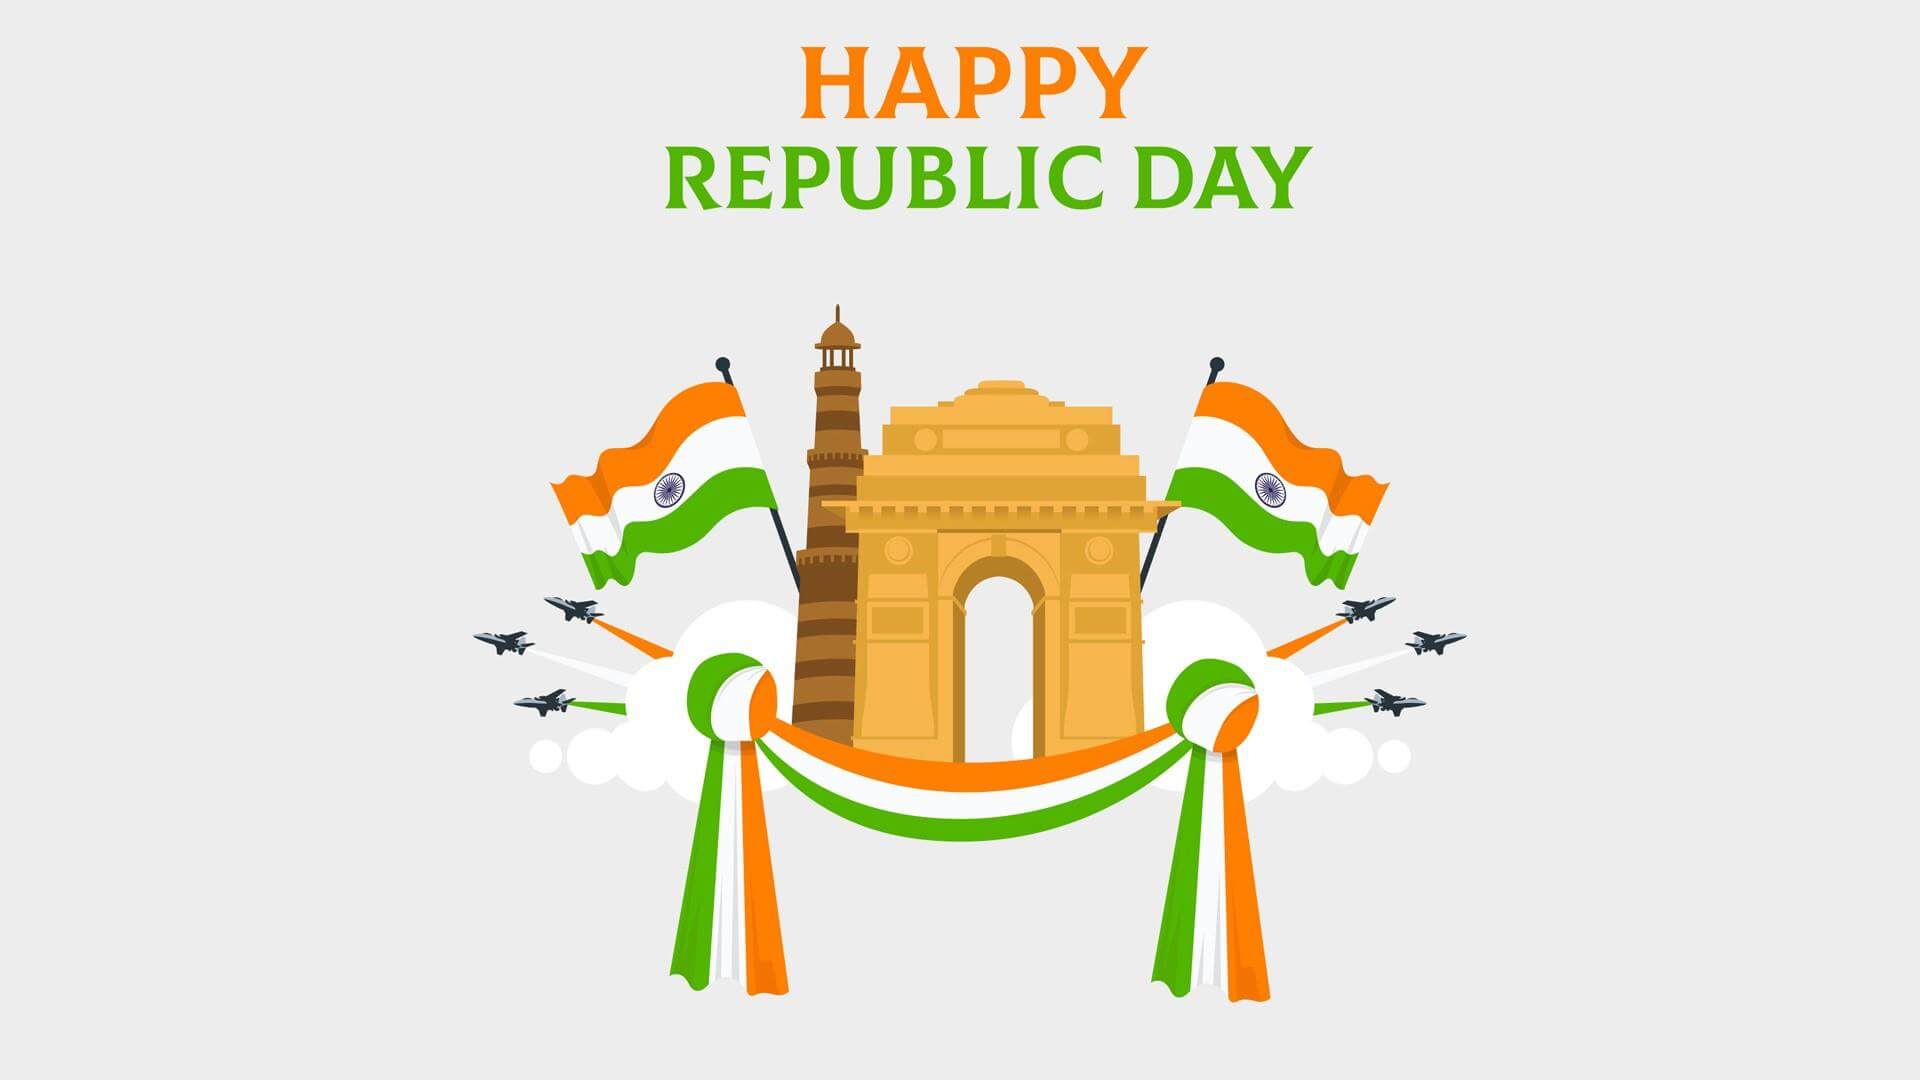 Happy Republic Day Image and Photo Collection 2022